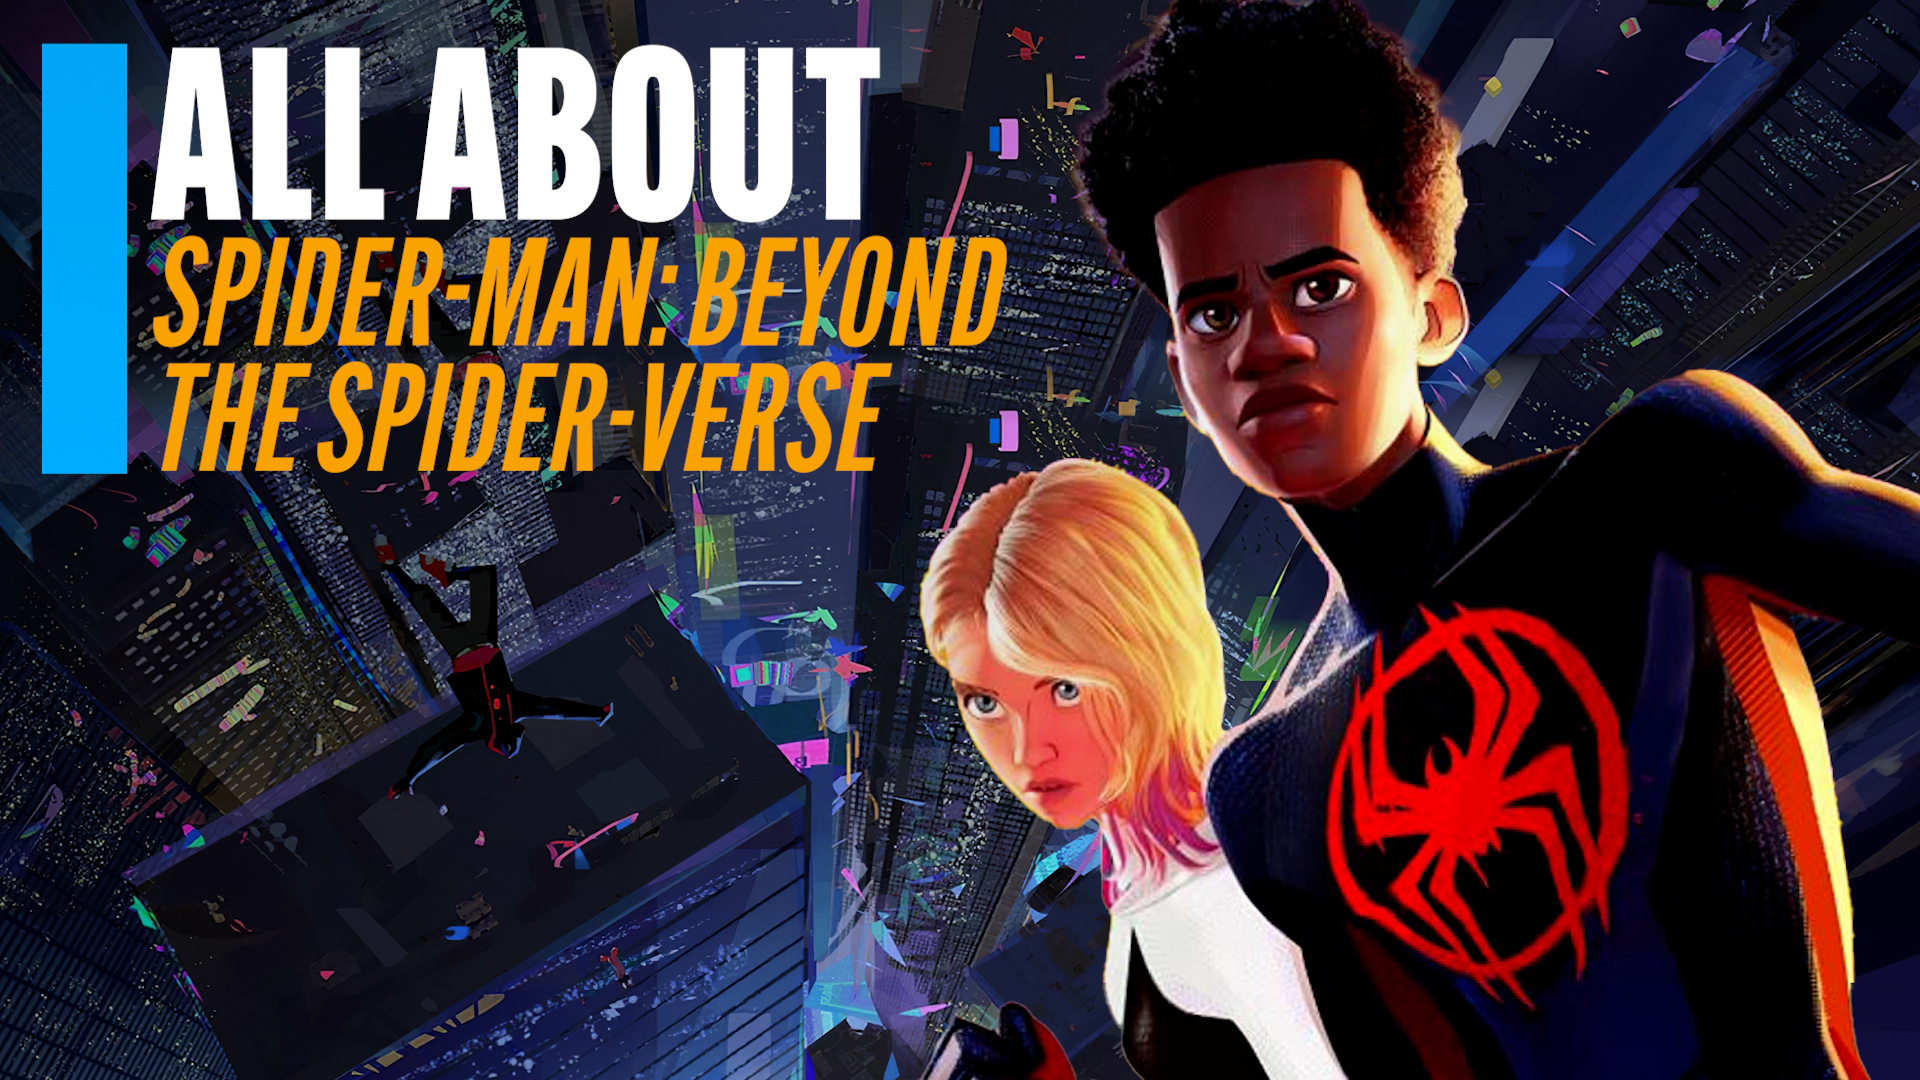 A picture of Beyond the Spider-Verse